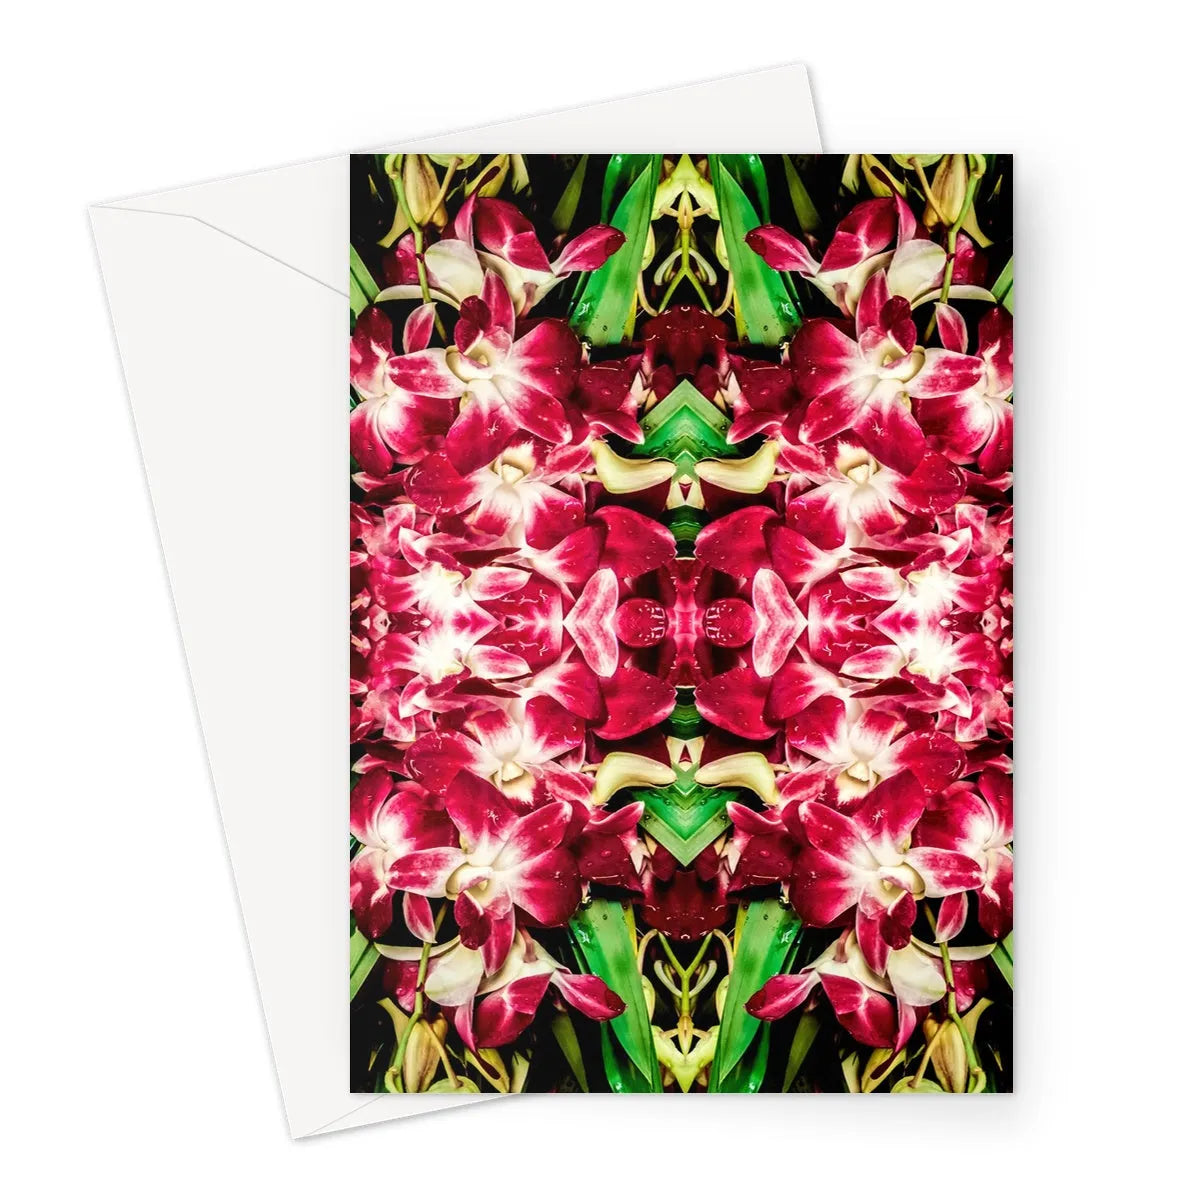 Ruby Reds Greeting Card - A5 Portrait / 10 Cards - Greeting & Note Cards - Aesthetic Art